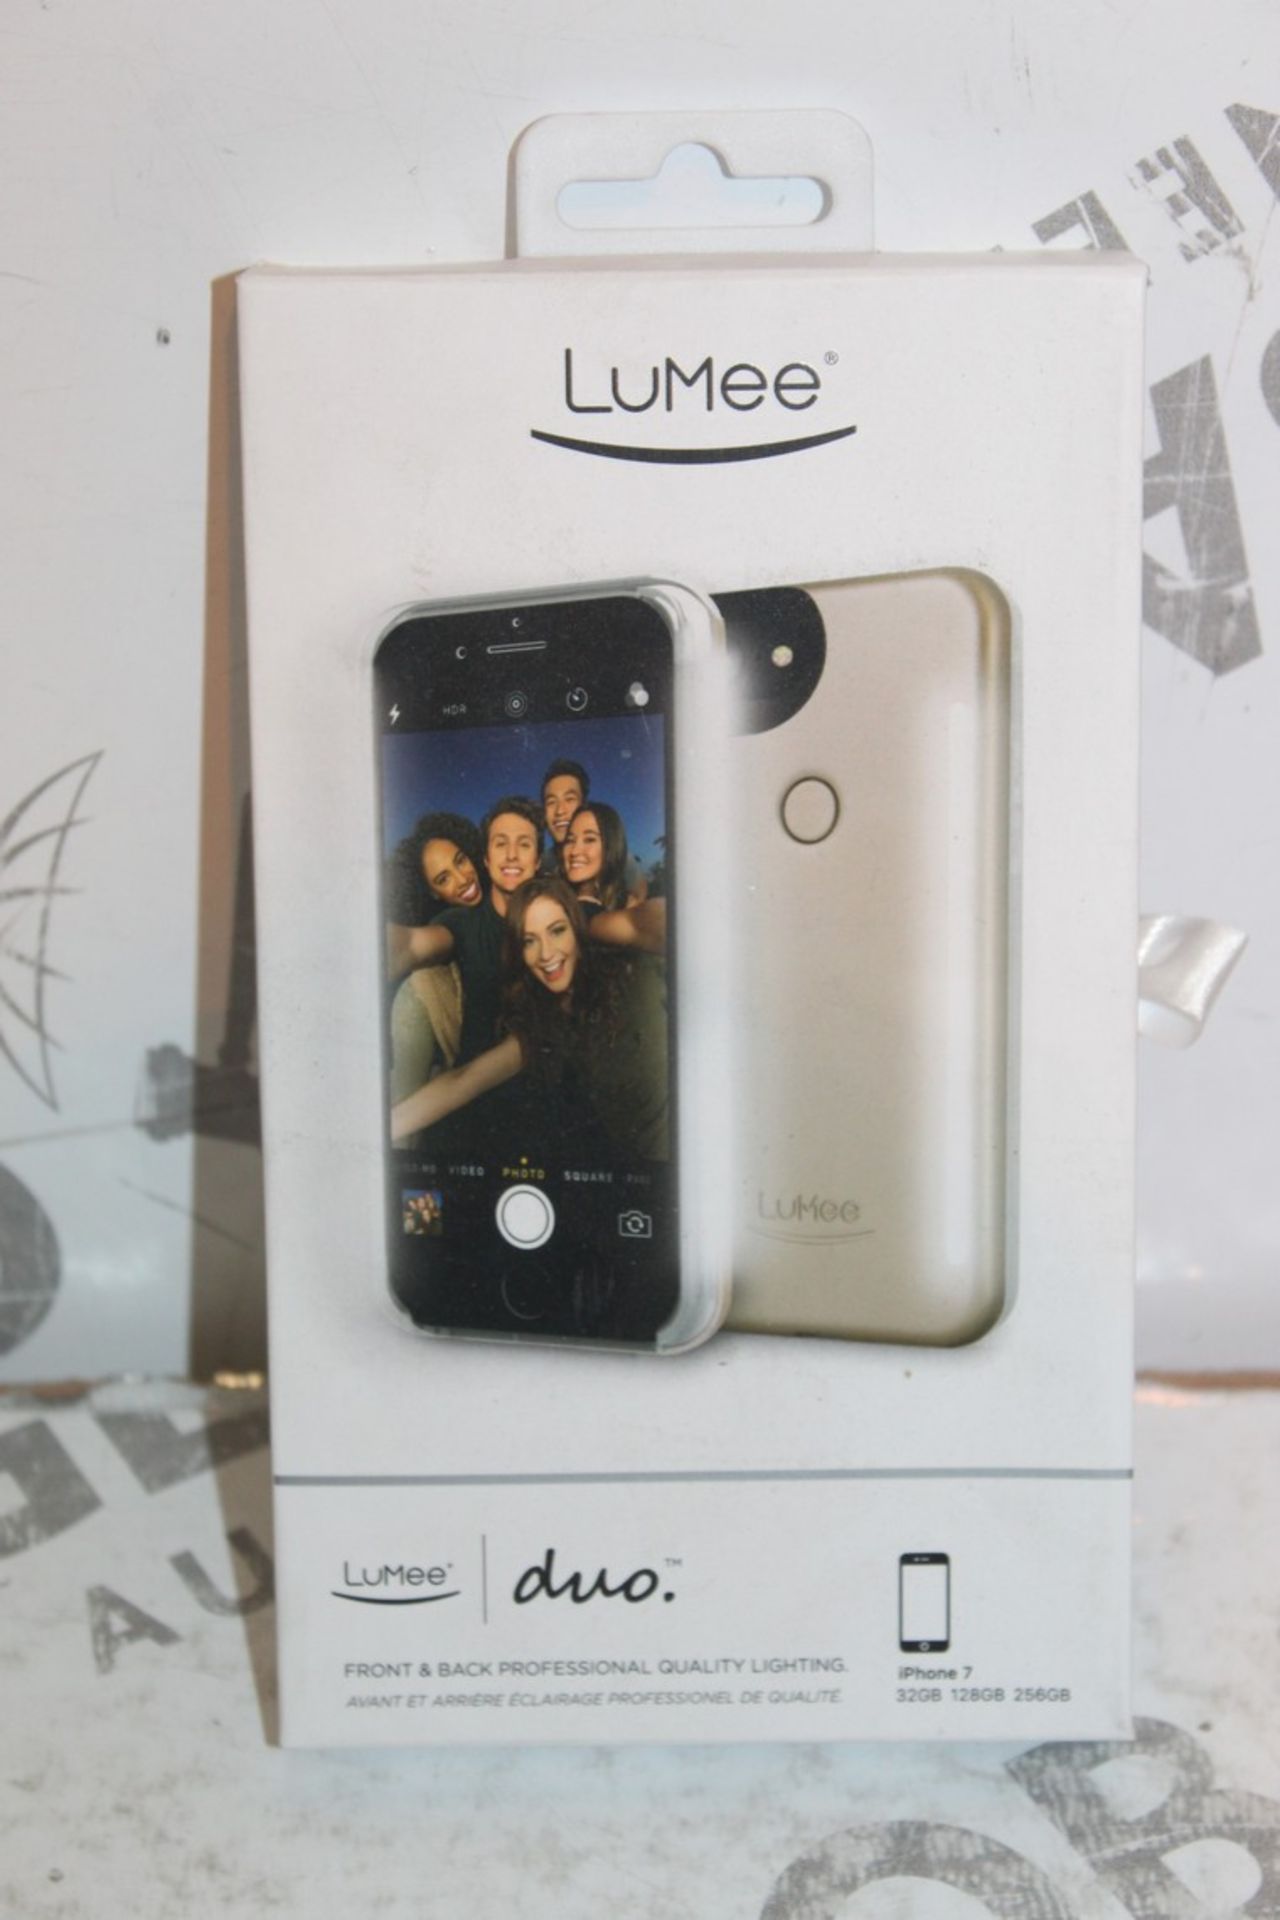 2 Lummee Duo iPhone 7 Rose Gold Front & Back Professional Lighting Cases Combined RRP £100